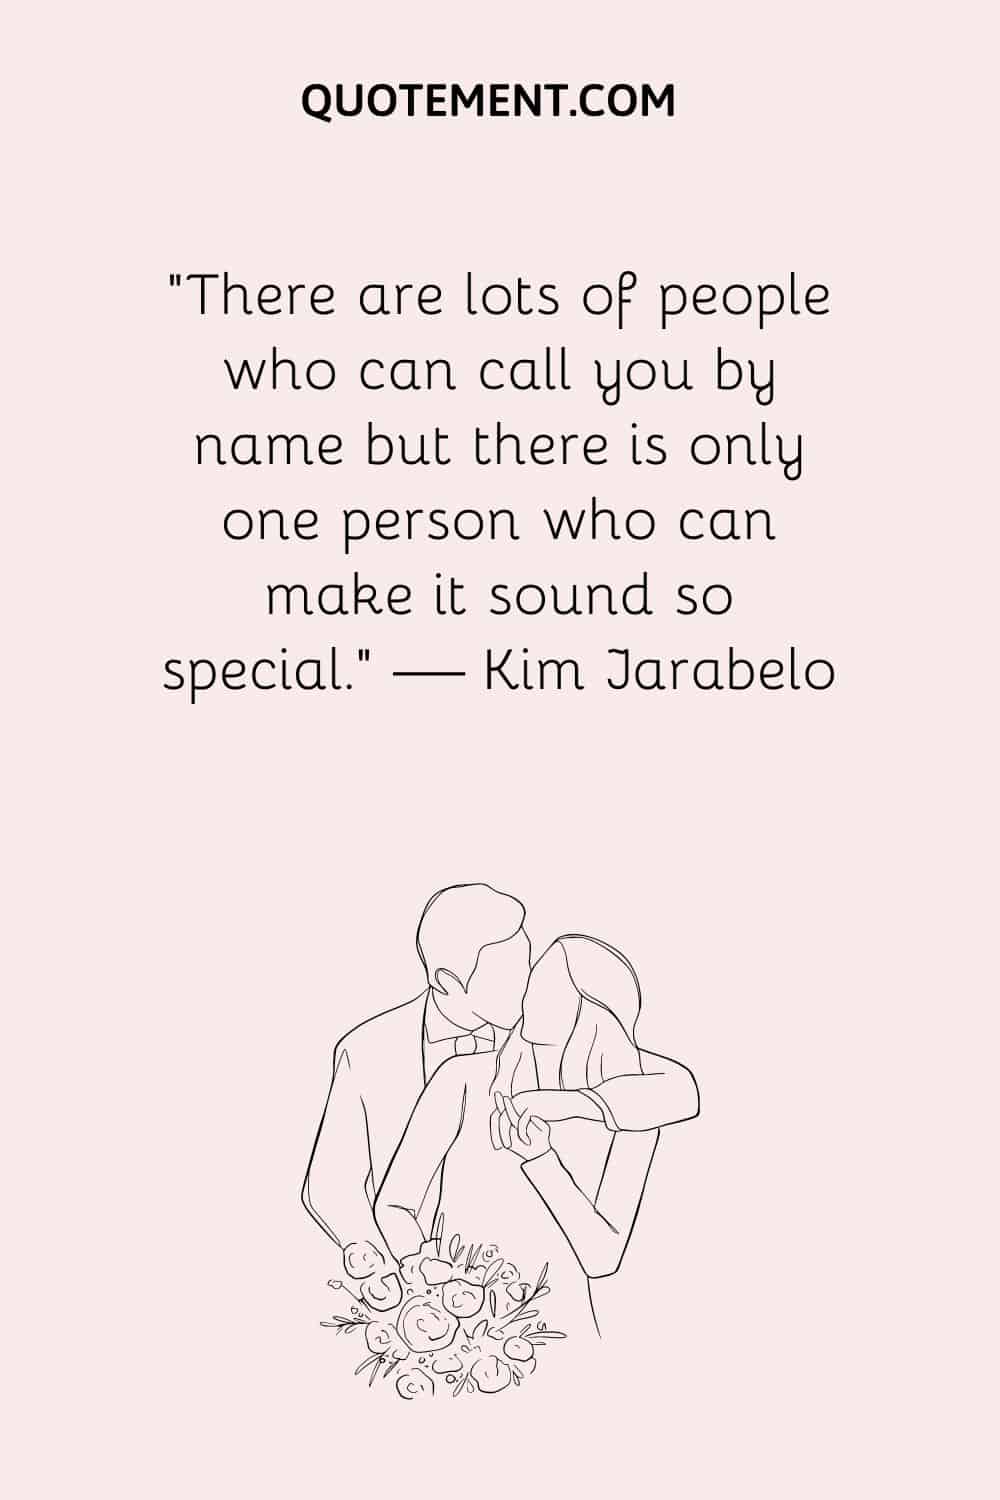 There are lots of people who can call you by name but there is only one person who can make it sound so special